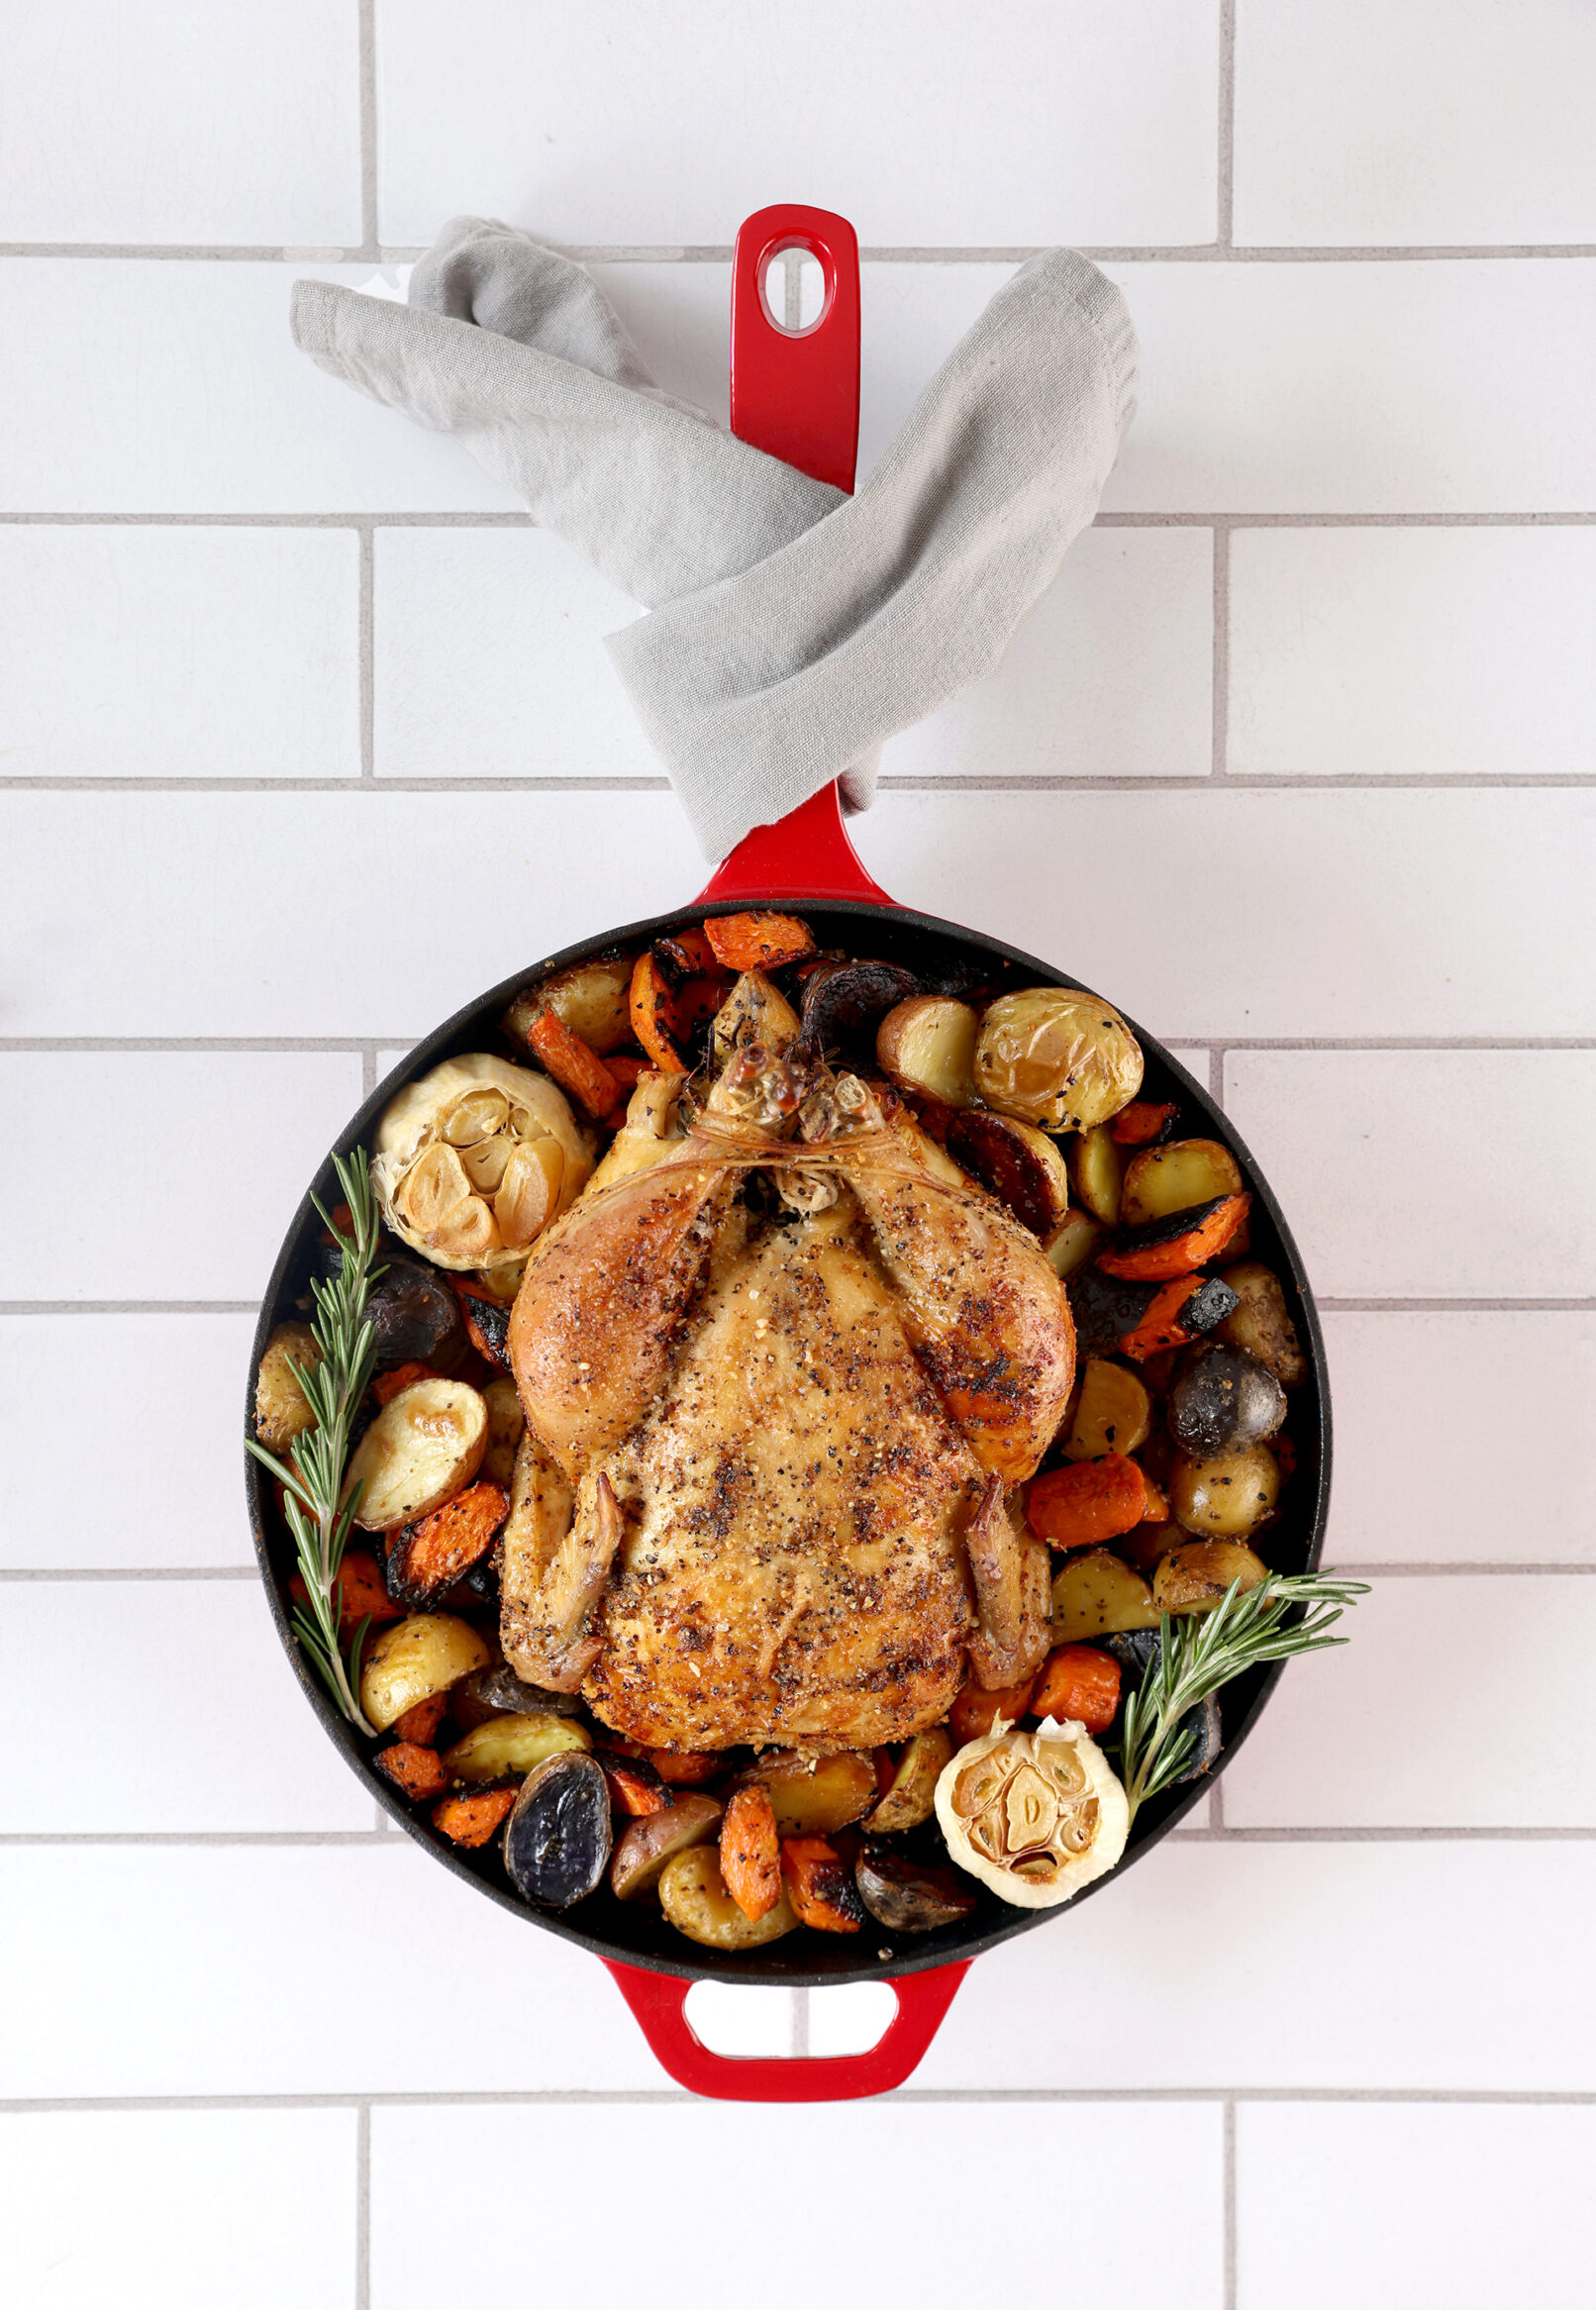 Photo of a whole, roasted chicken in a red Le Creuset skillet on a white tile background.